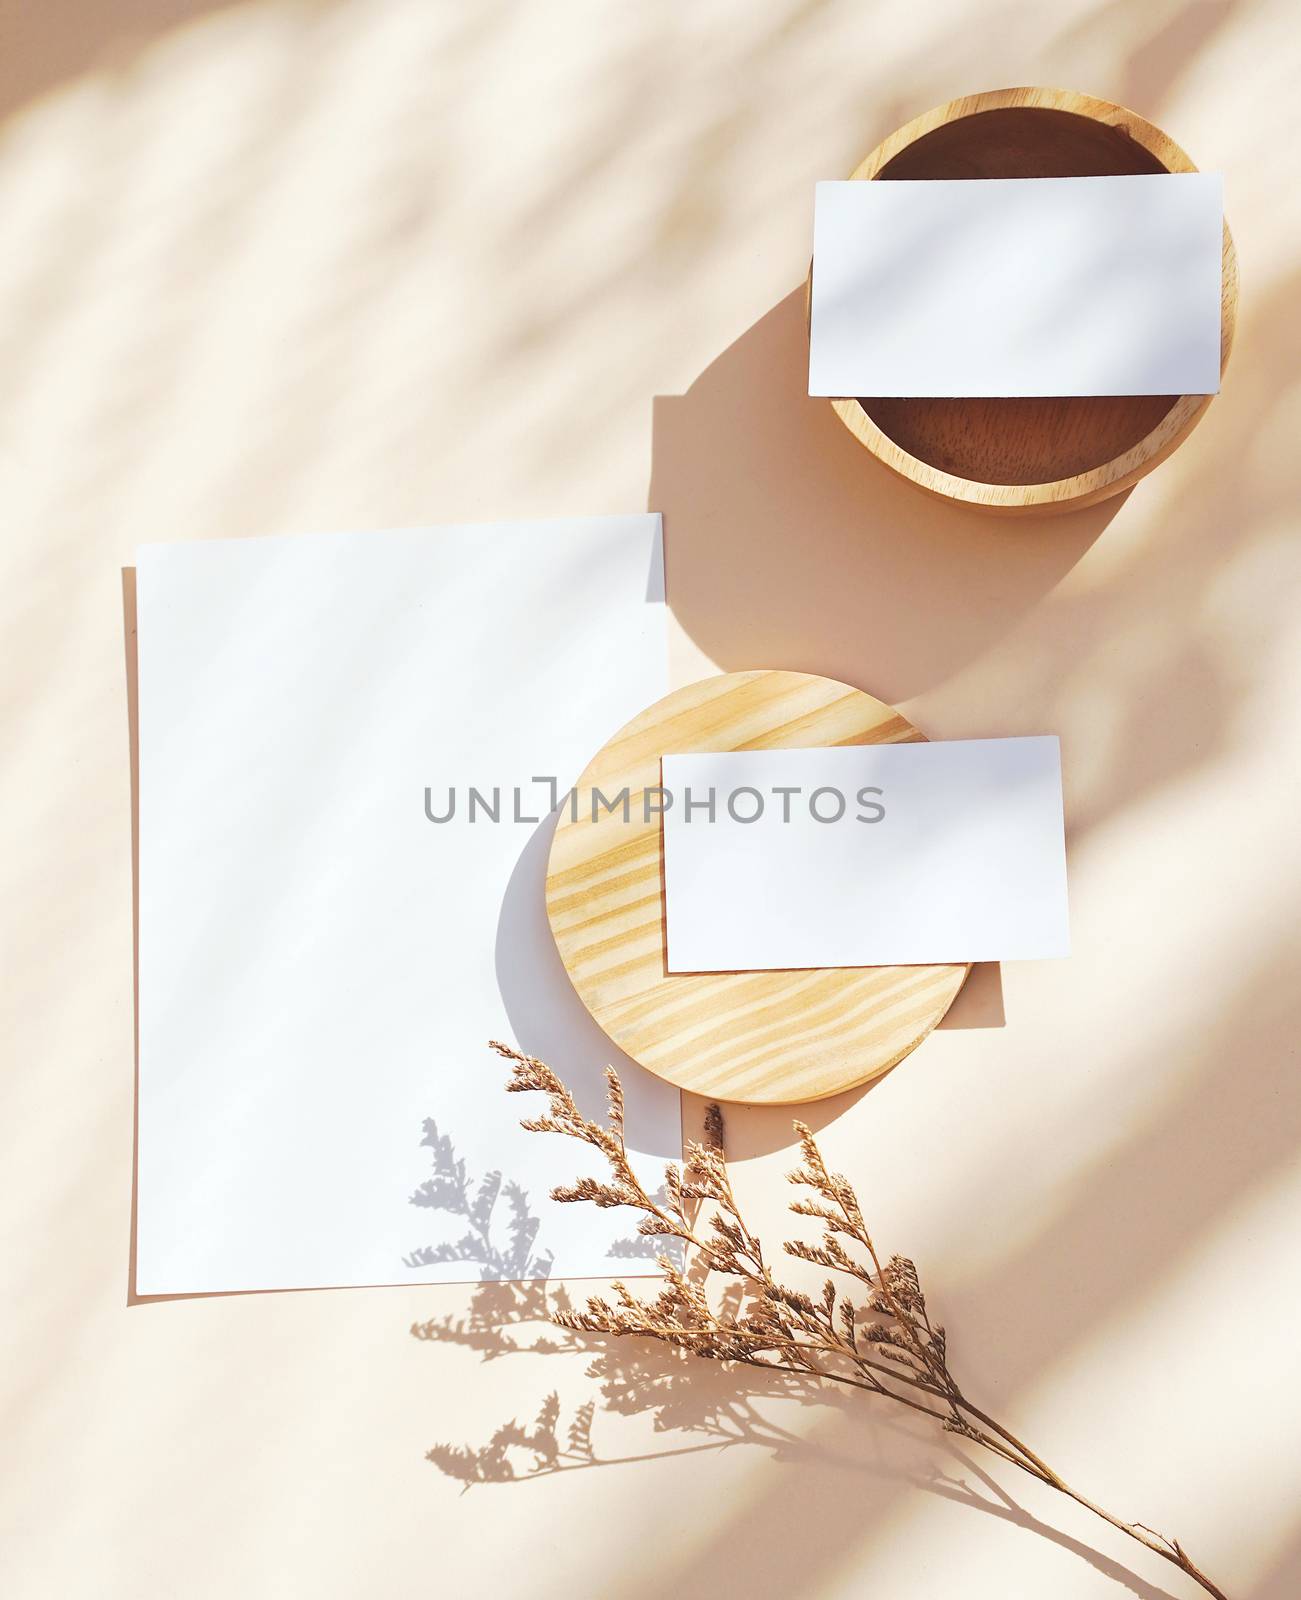 Flat lay of branding identity business name card on yellow background with flower and wooden container, light and shadow shape, minimal concept for design